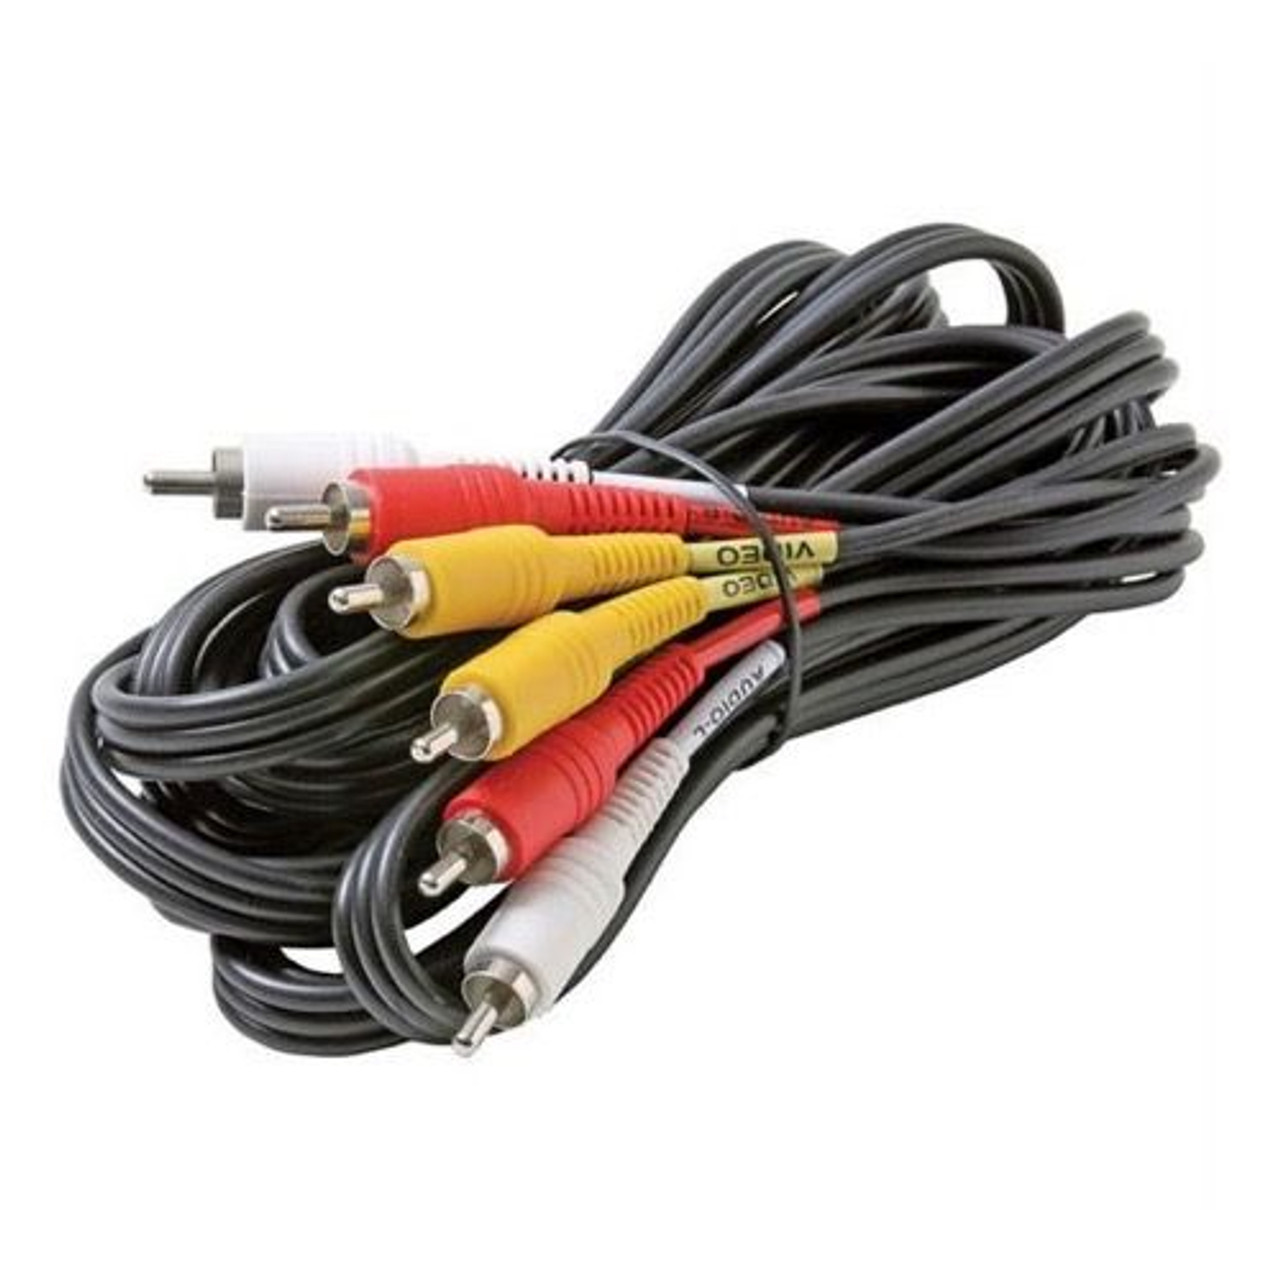 DIRECTV Composite Cable 3 RCA Male 8' FT Video Triple Connect RED YELLOW WHITE A/V Stereo Shielded Digital Signal DVD VCR Hook-Up Jumper with Plug Connectors